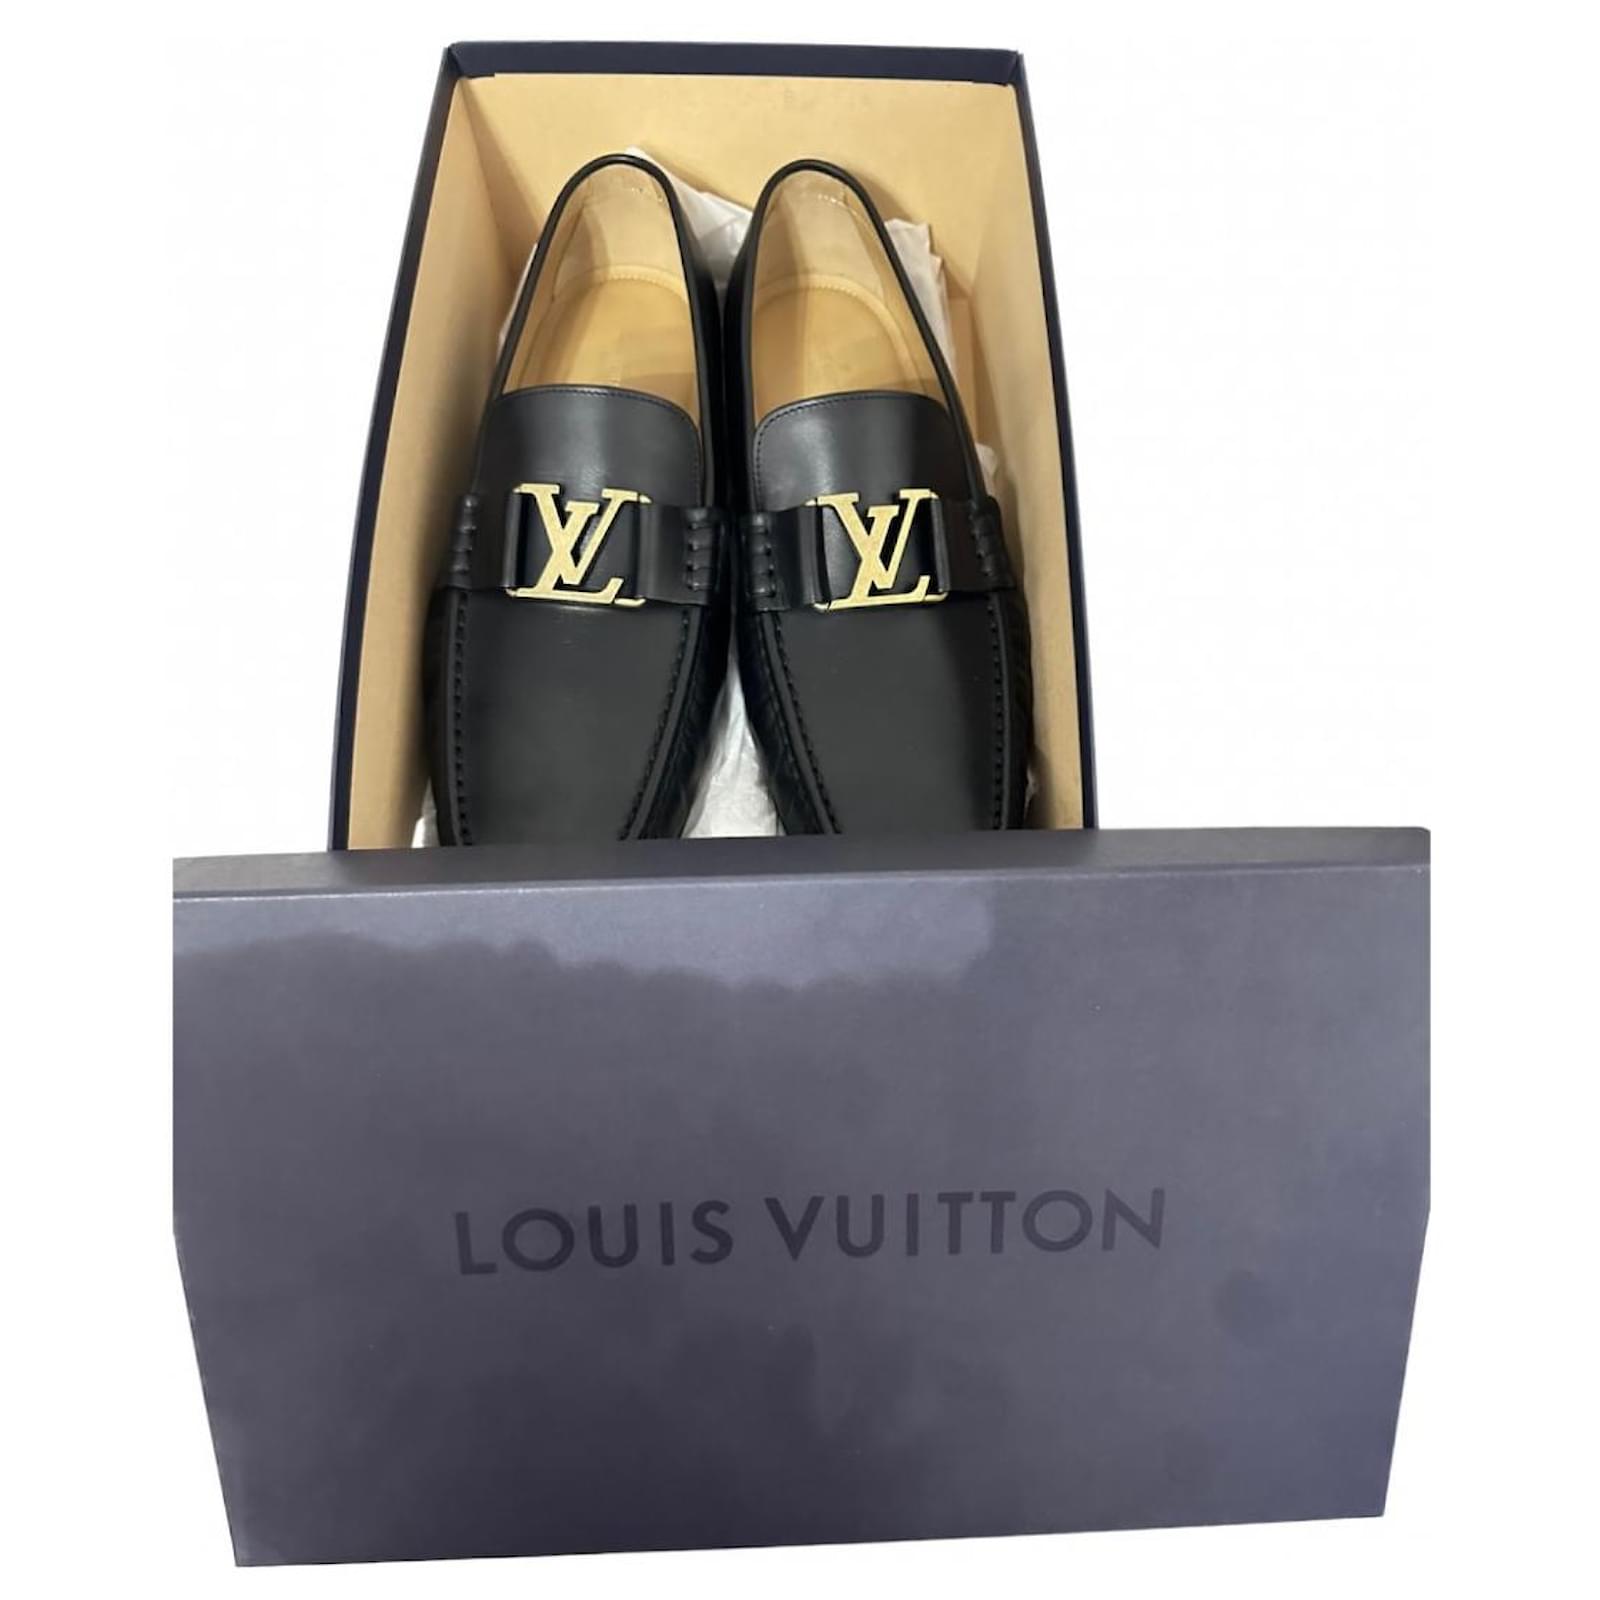 louis vuitton shoes loafers